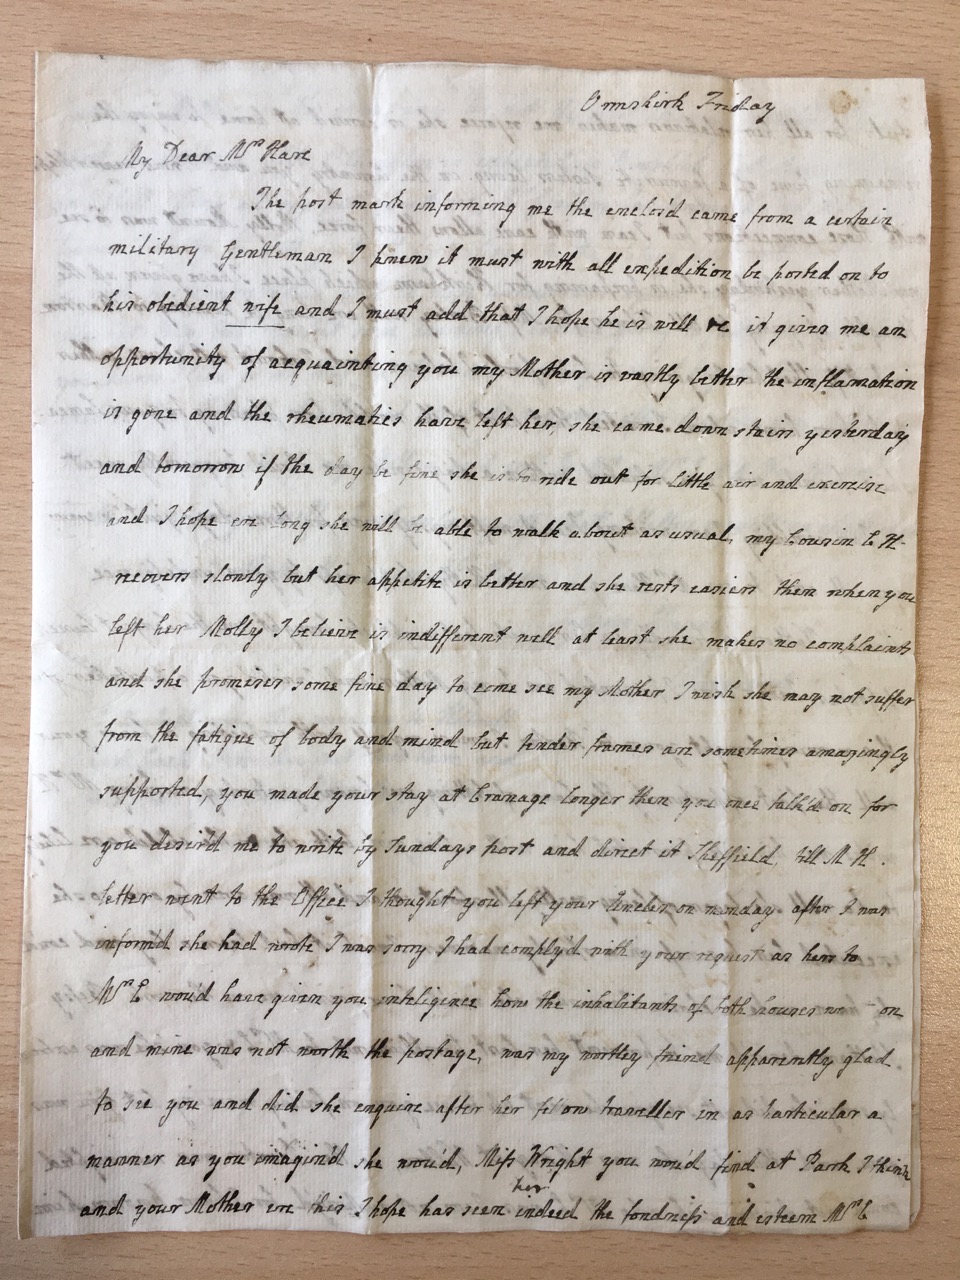 Image #1 of letter: J[enny] Brownsword to Ann Hare, Friday [c1783?]